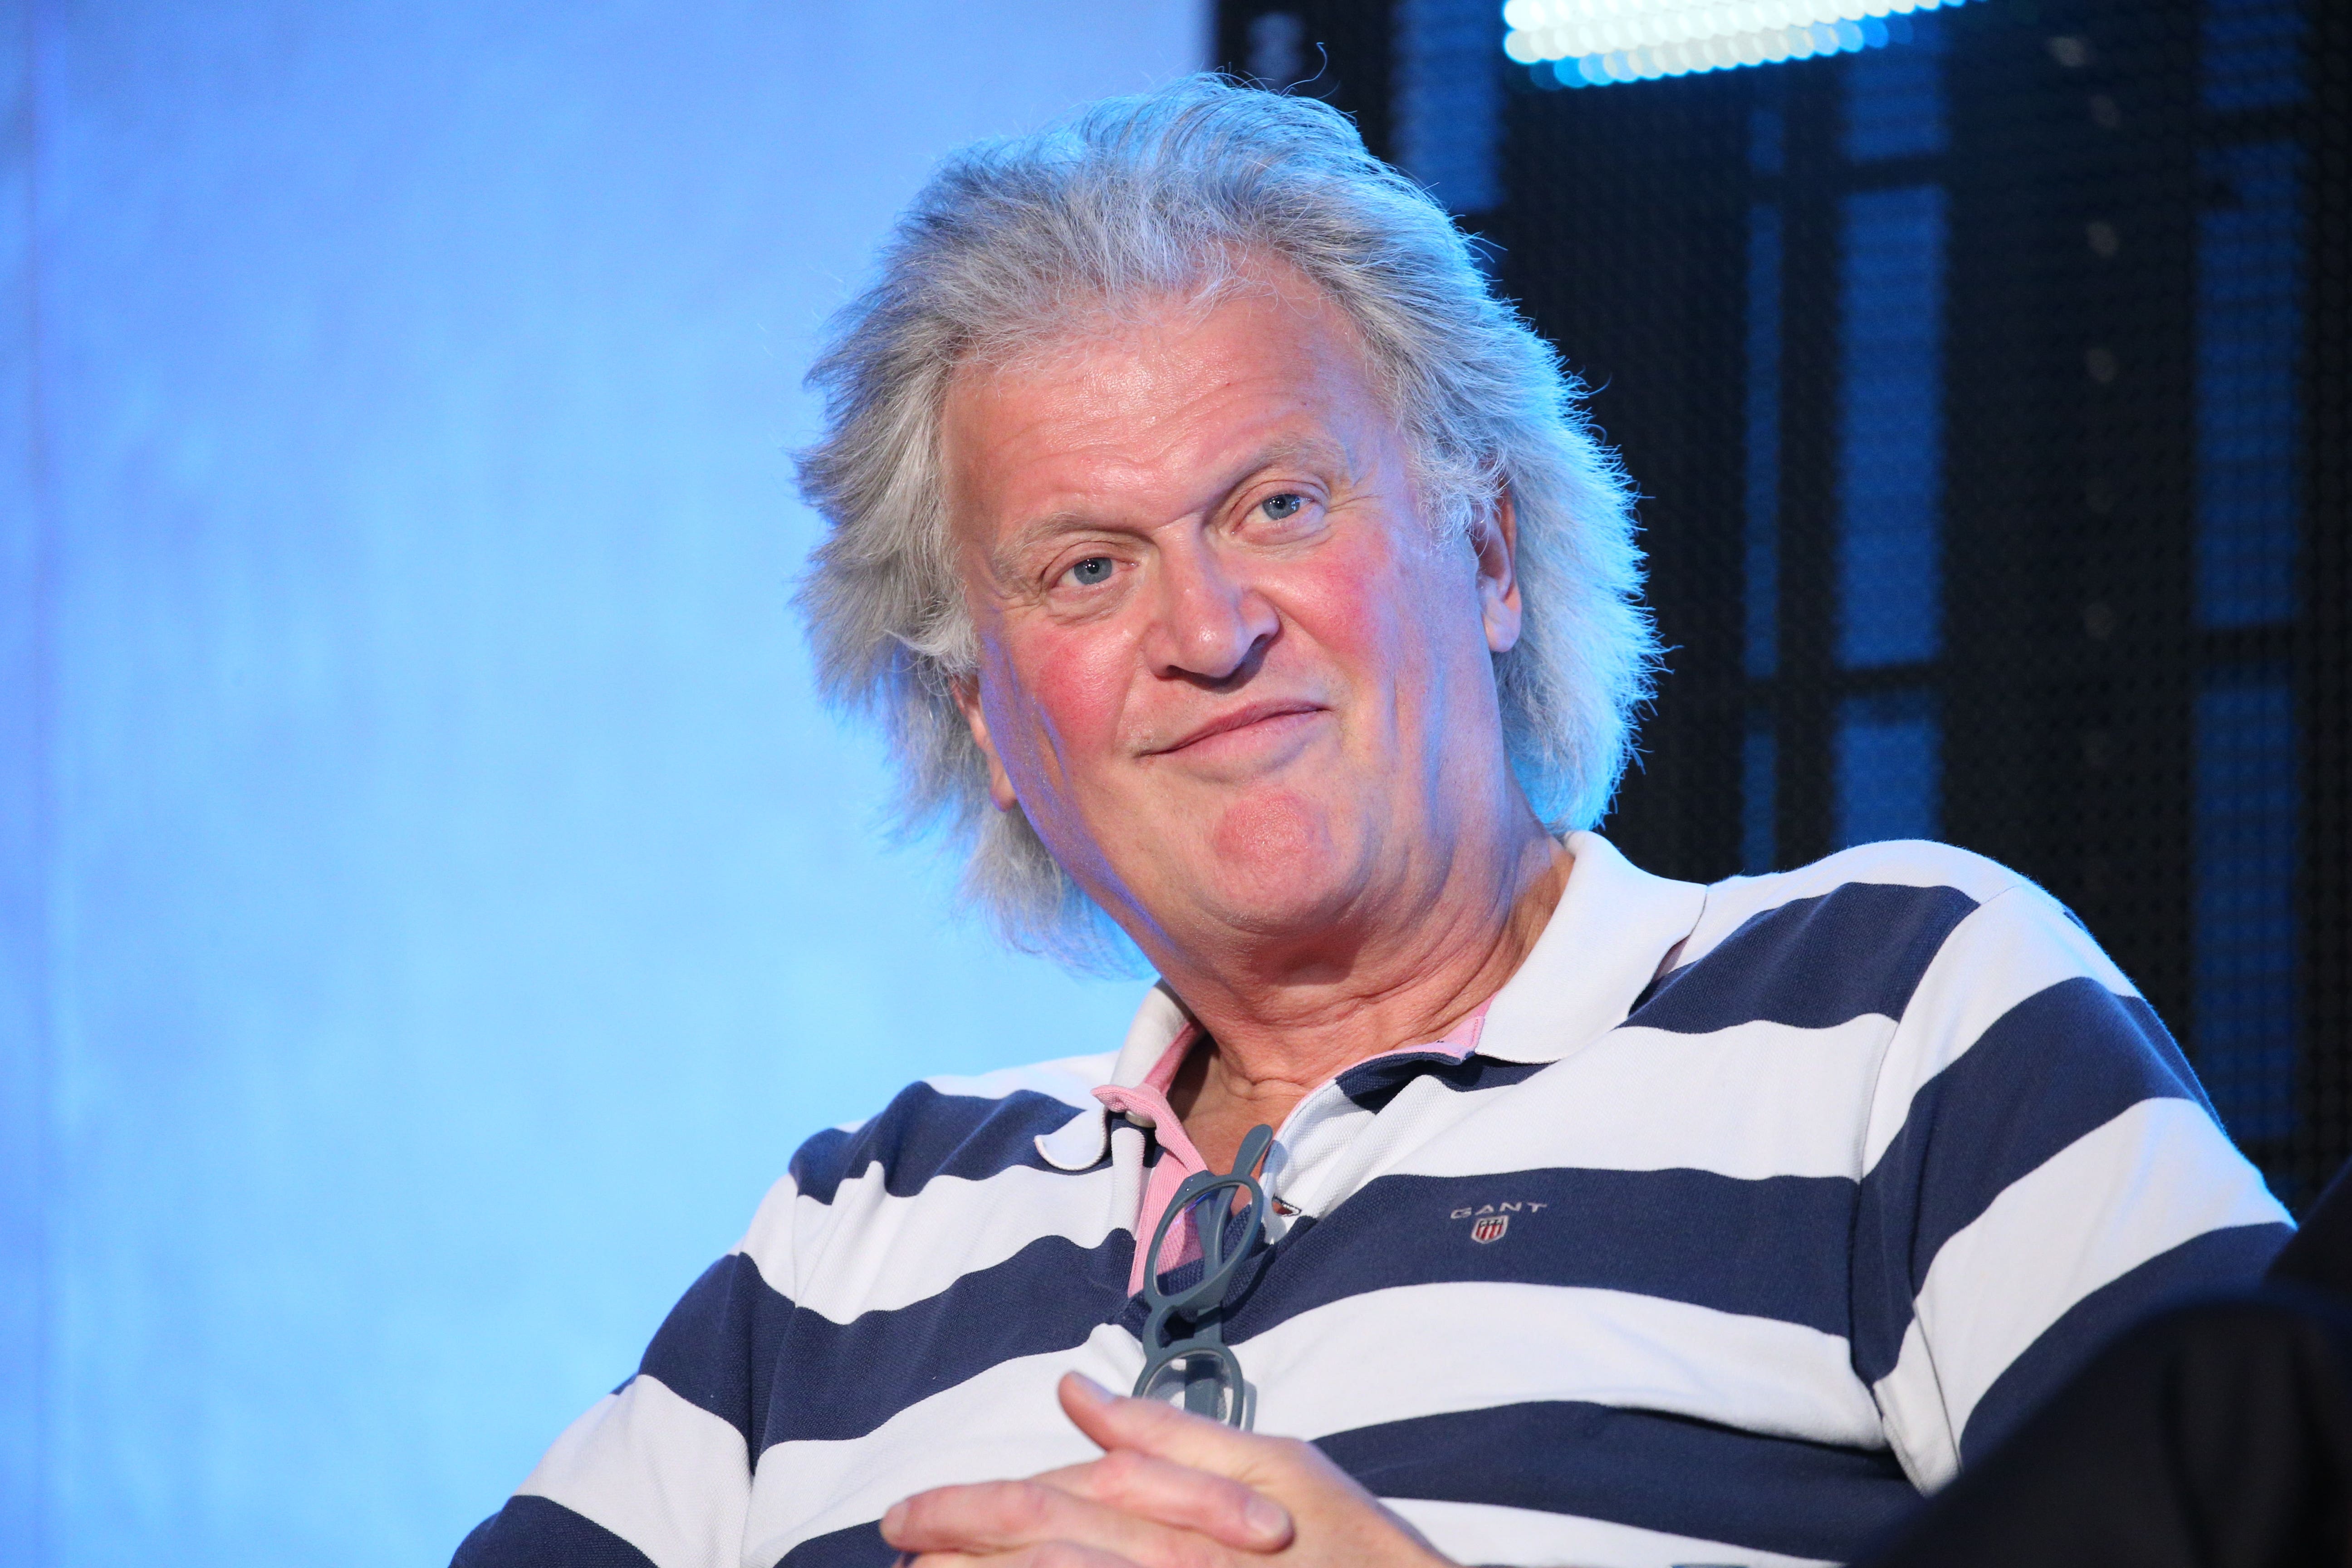 Wetherspoon founder Tim Martin was knighted